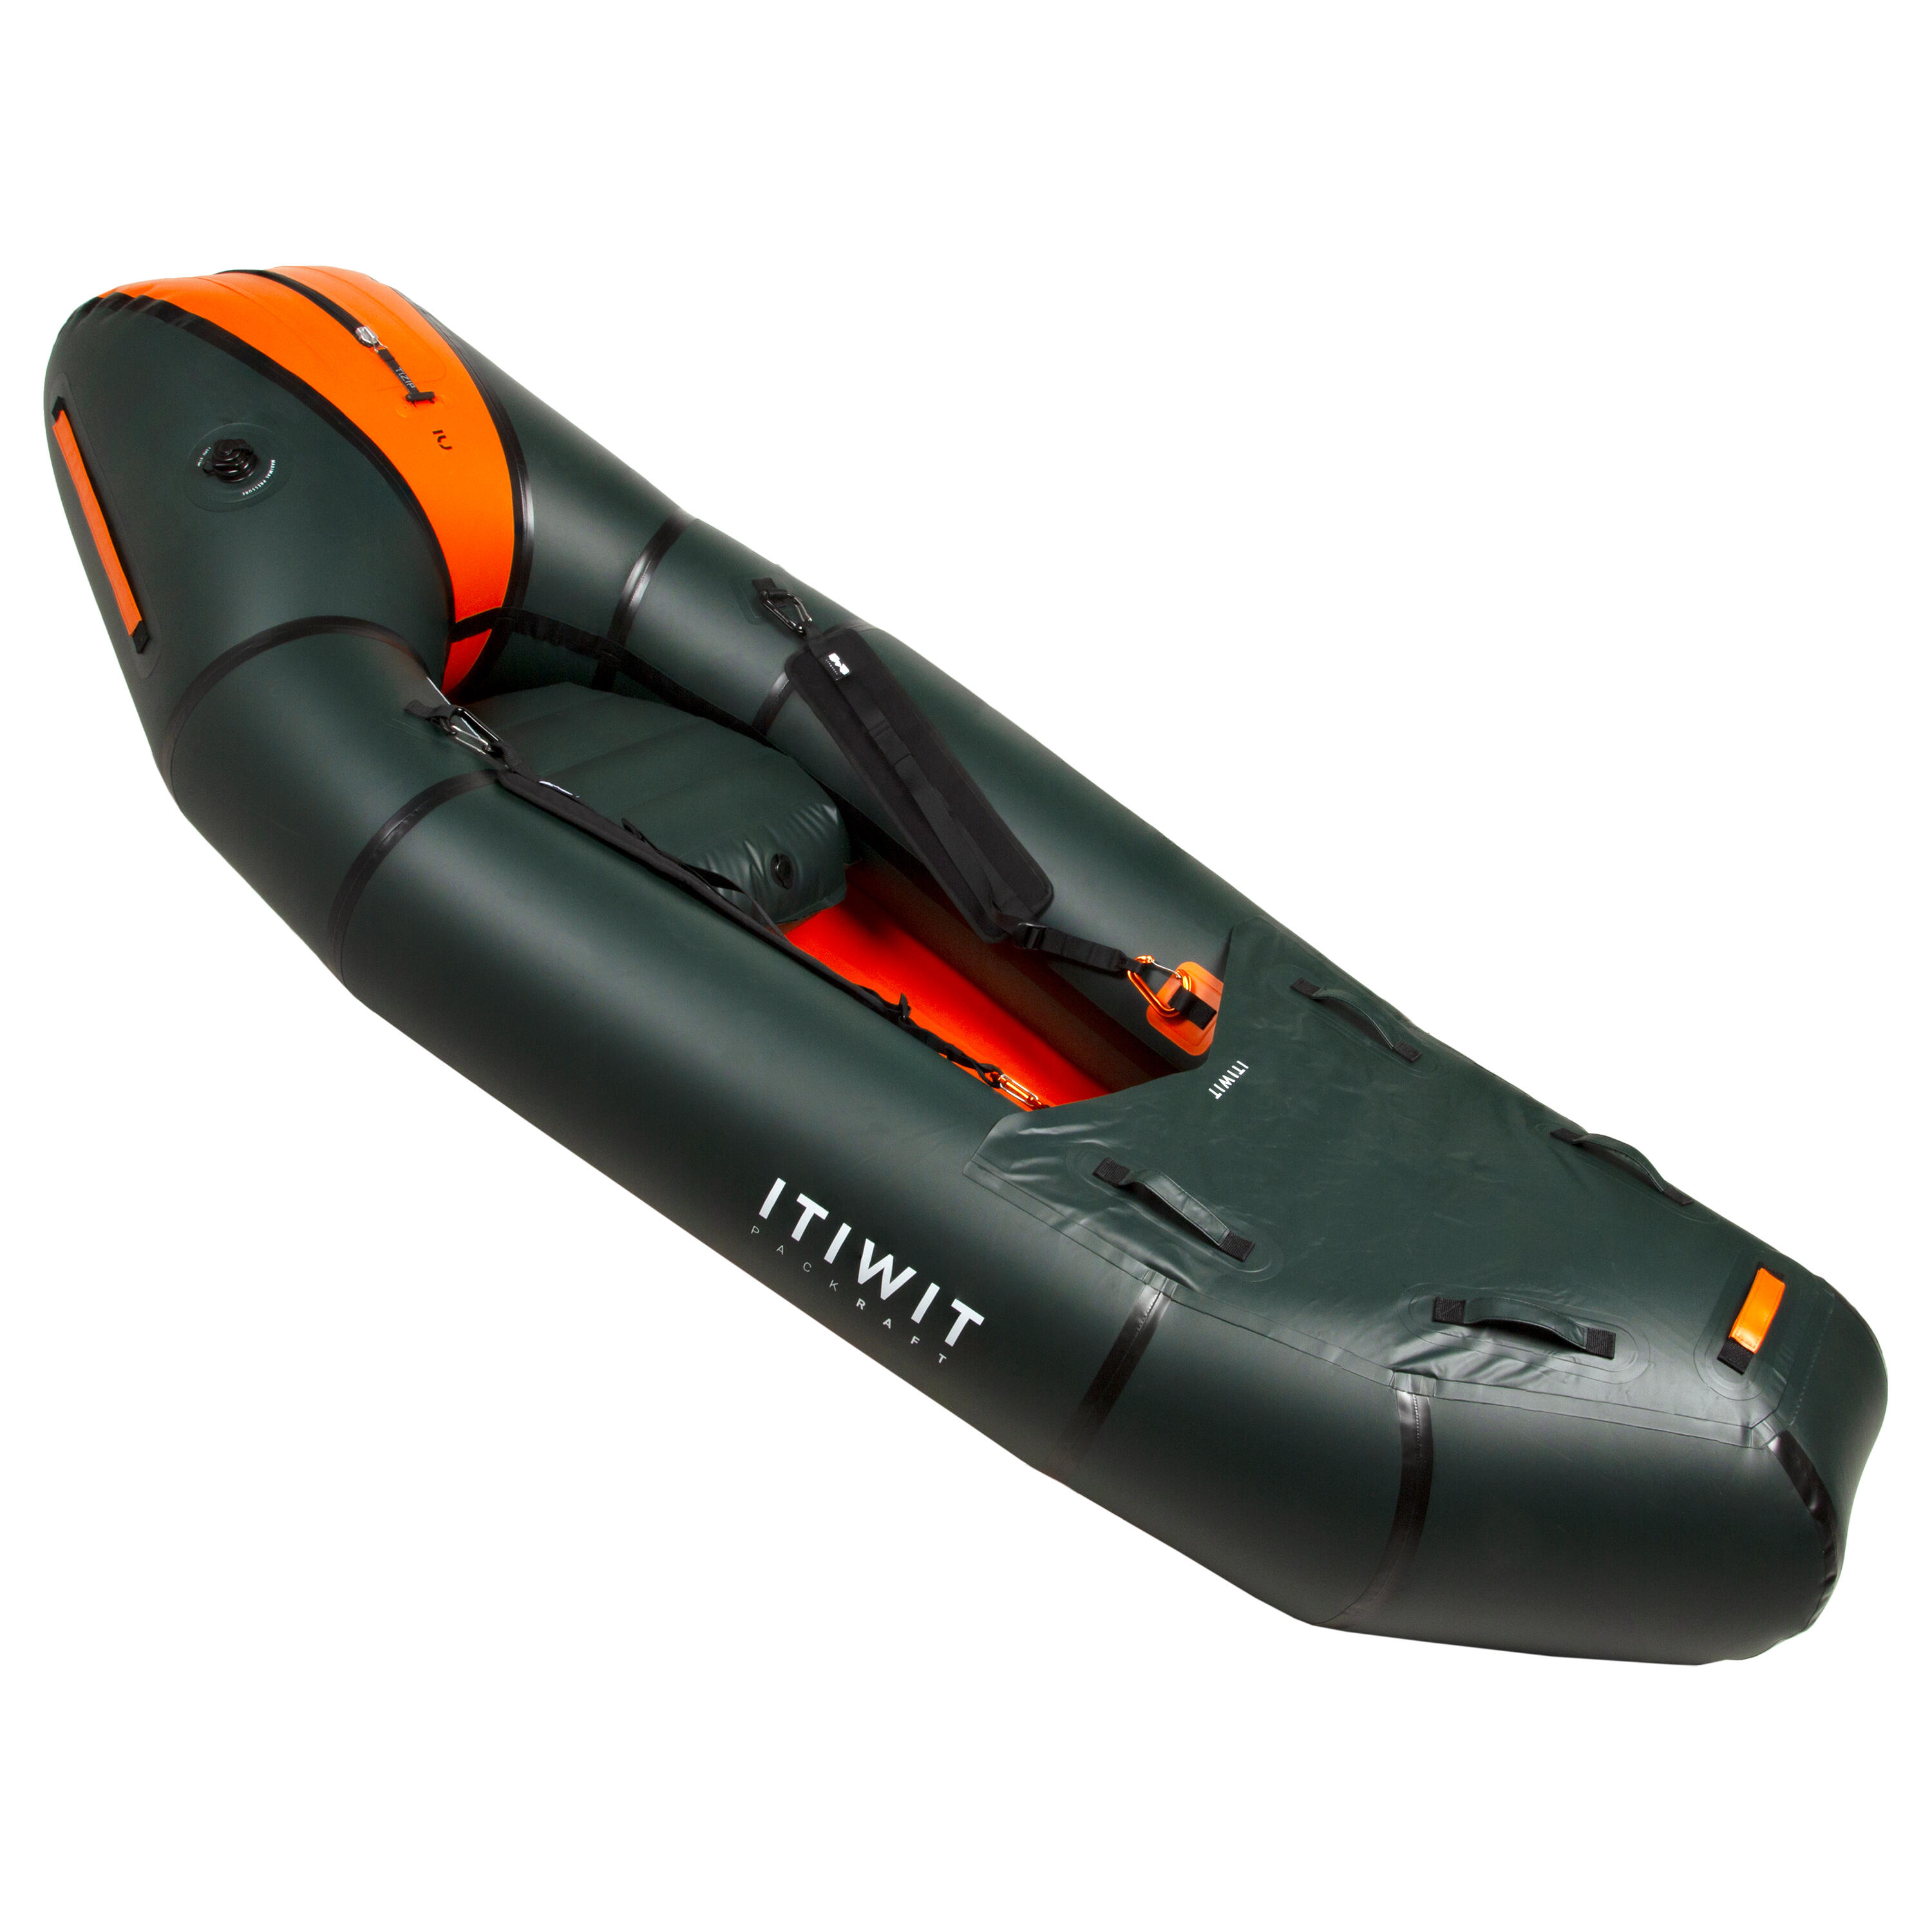 Inflatable seat + strap packrafts PR500 Itiwit 3/3